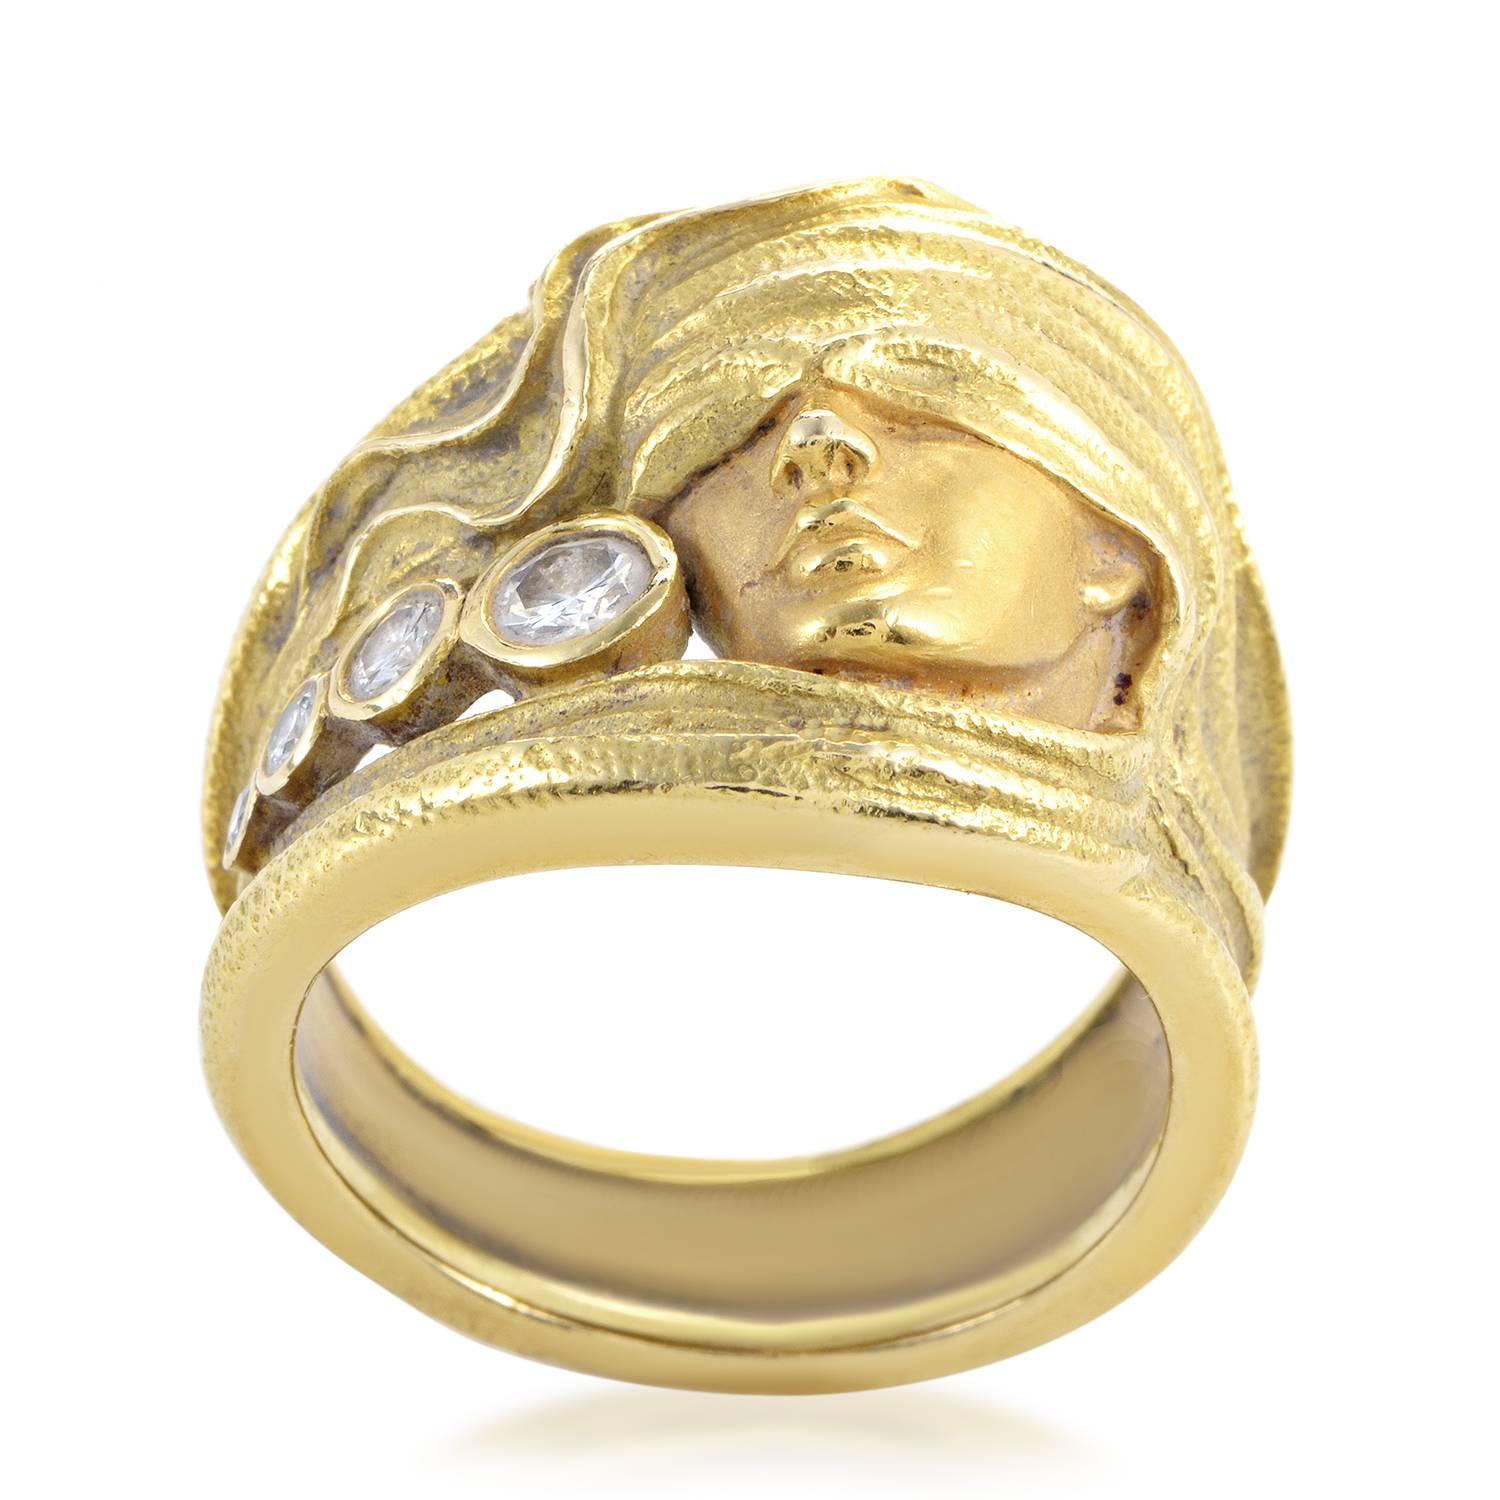 An engaging motif of a woman's face covered in wavering cloth crafted in astonishingly realistic fashion from precious 18K yellow gold makes this ring from Carrera y Carrera an item of immense artistic appeal embellished with 0.28ct of lovely